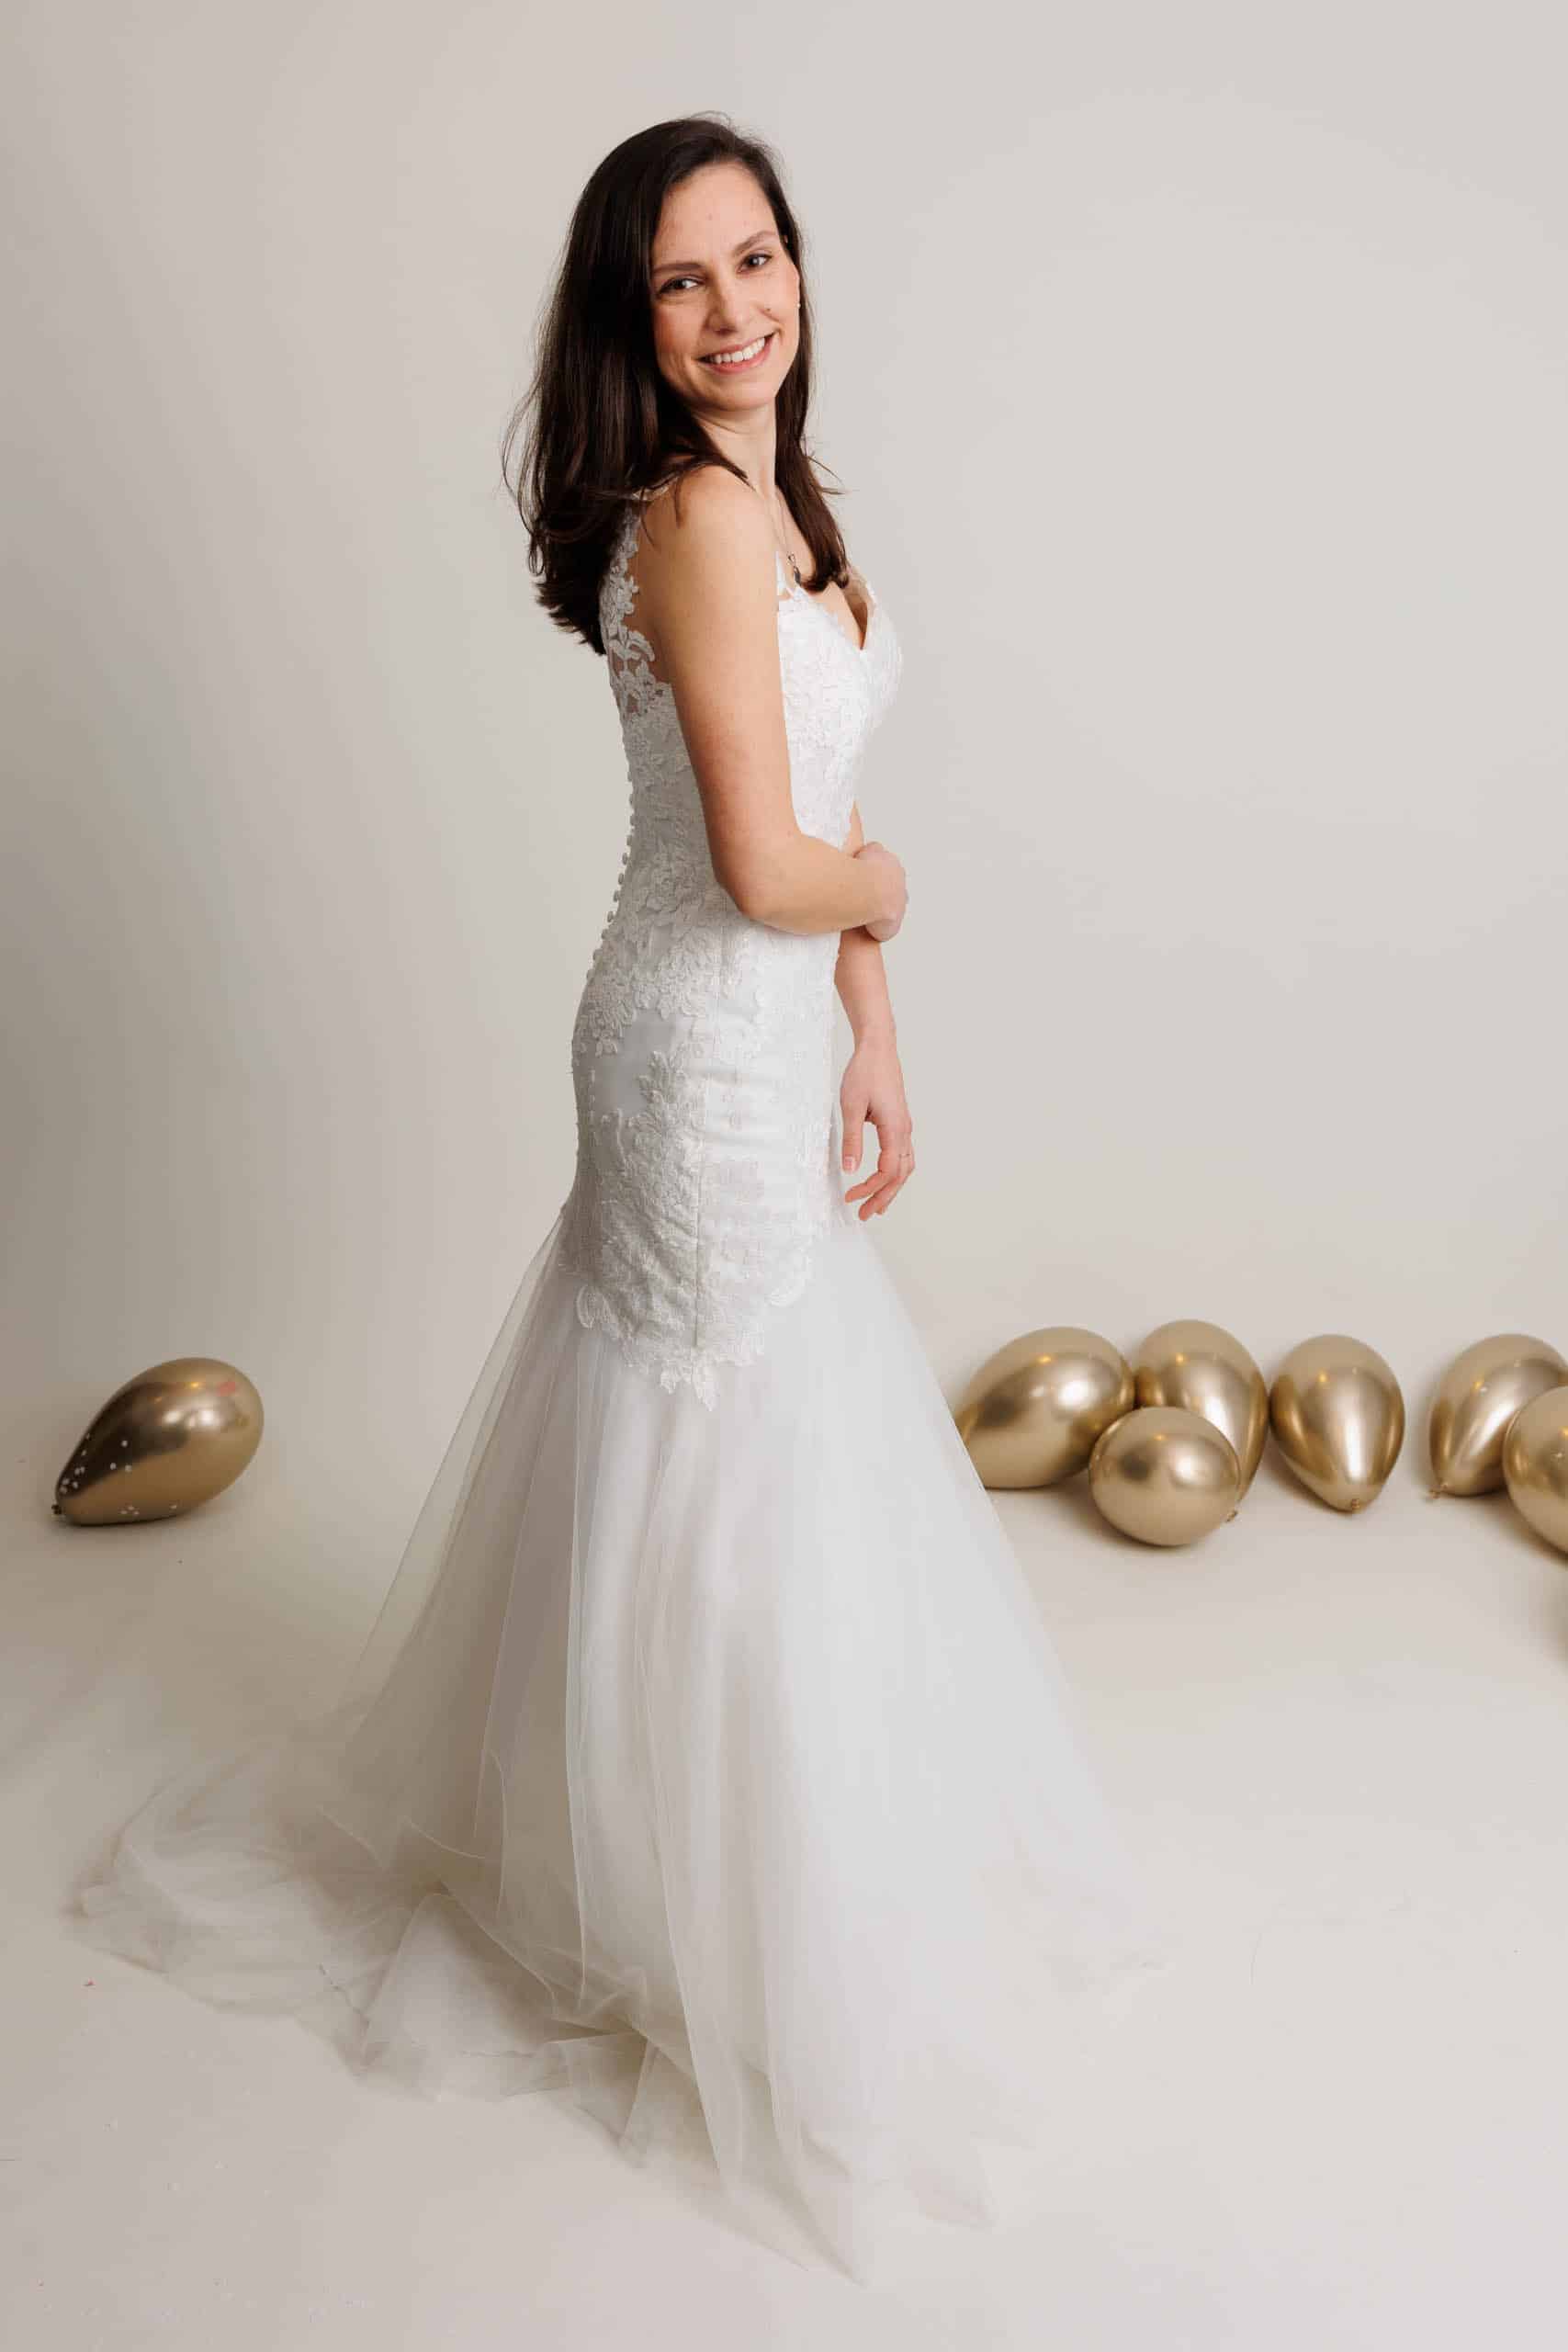 A bride in a wedding dress poses in front of gold balloons while trying on wedding dresses.